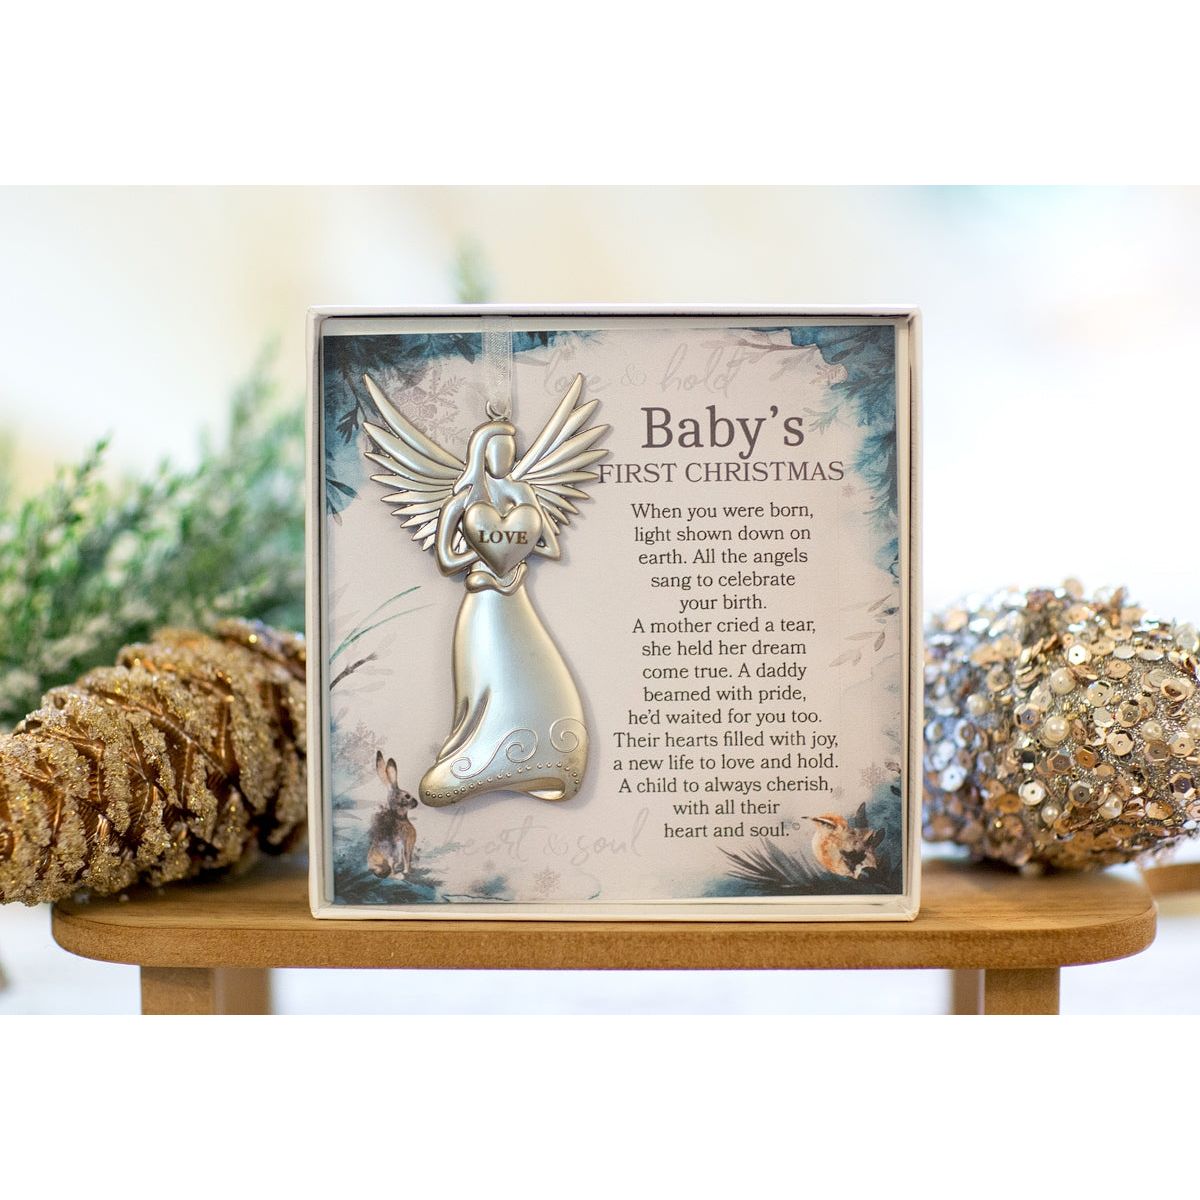 Baby&#39;s First Christmas angel ornament in box in a Christmas setting.